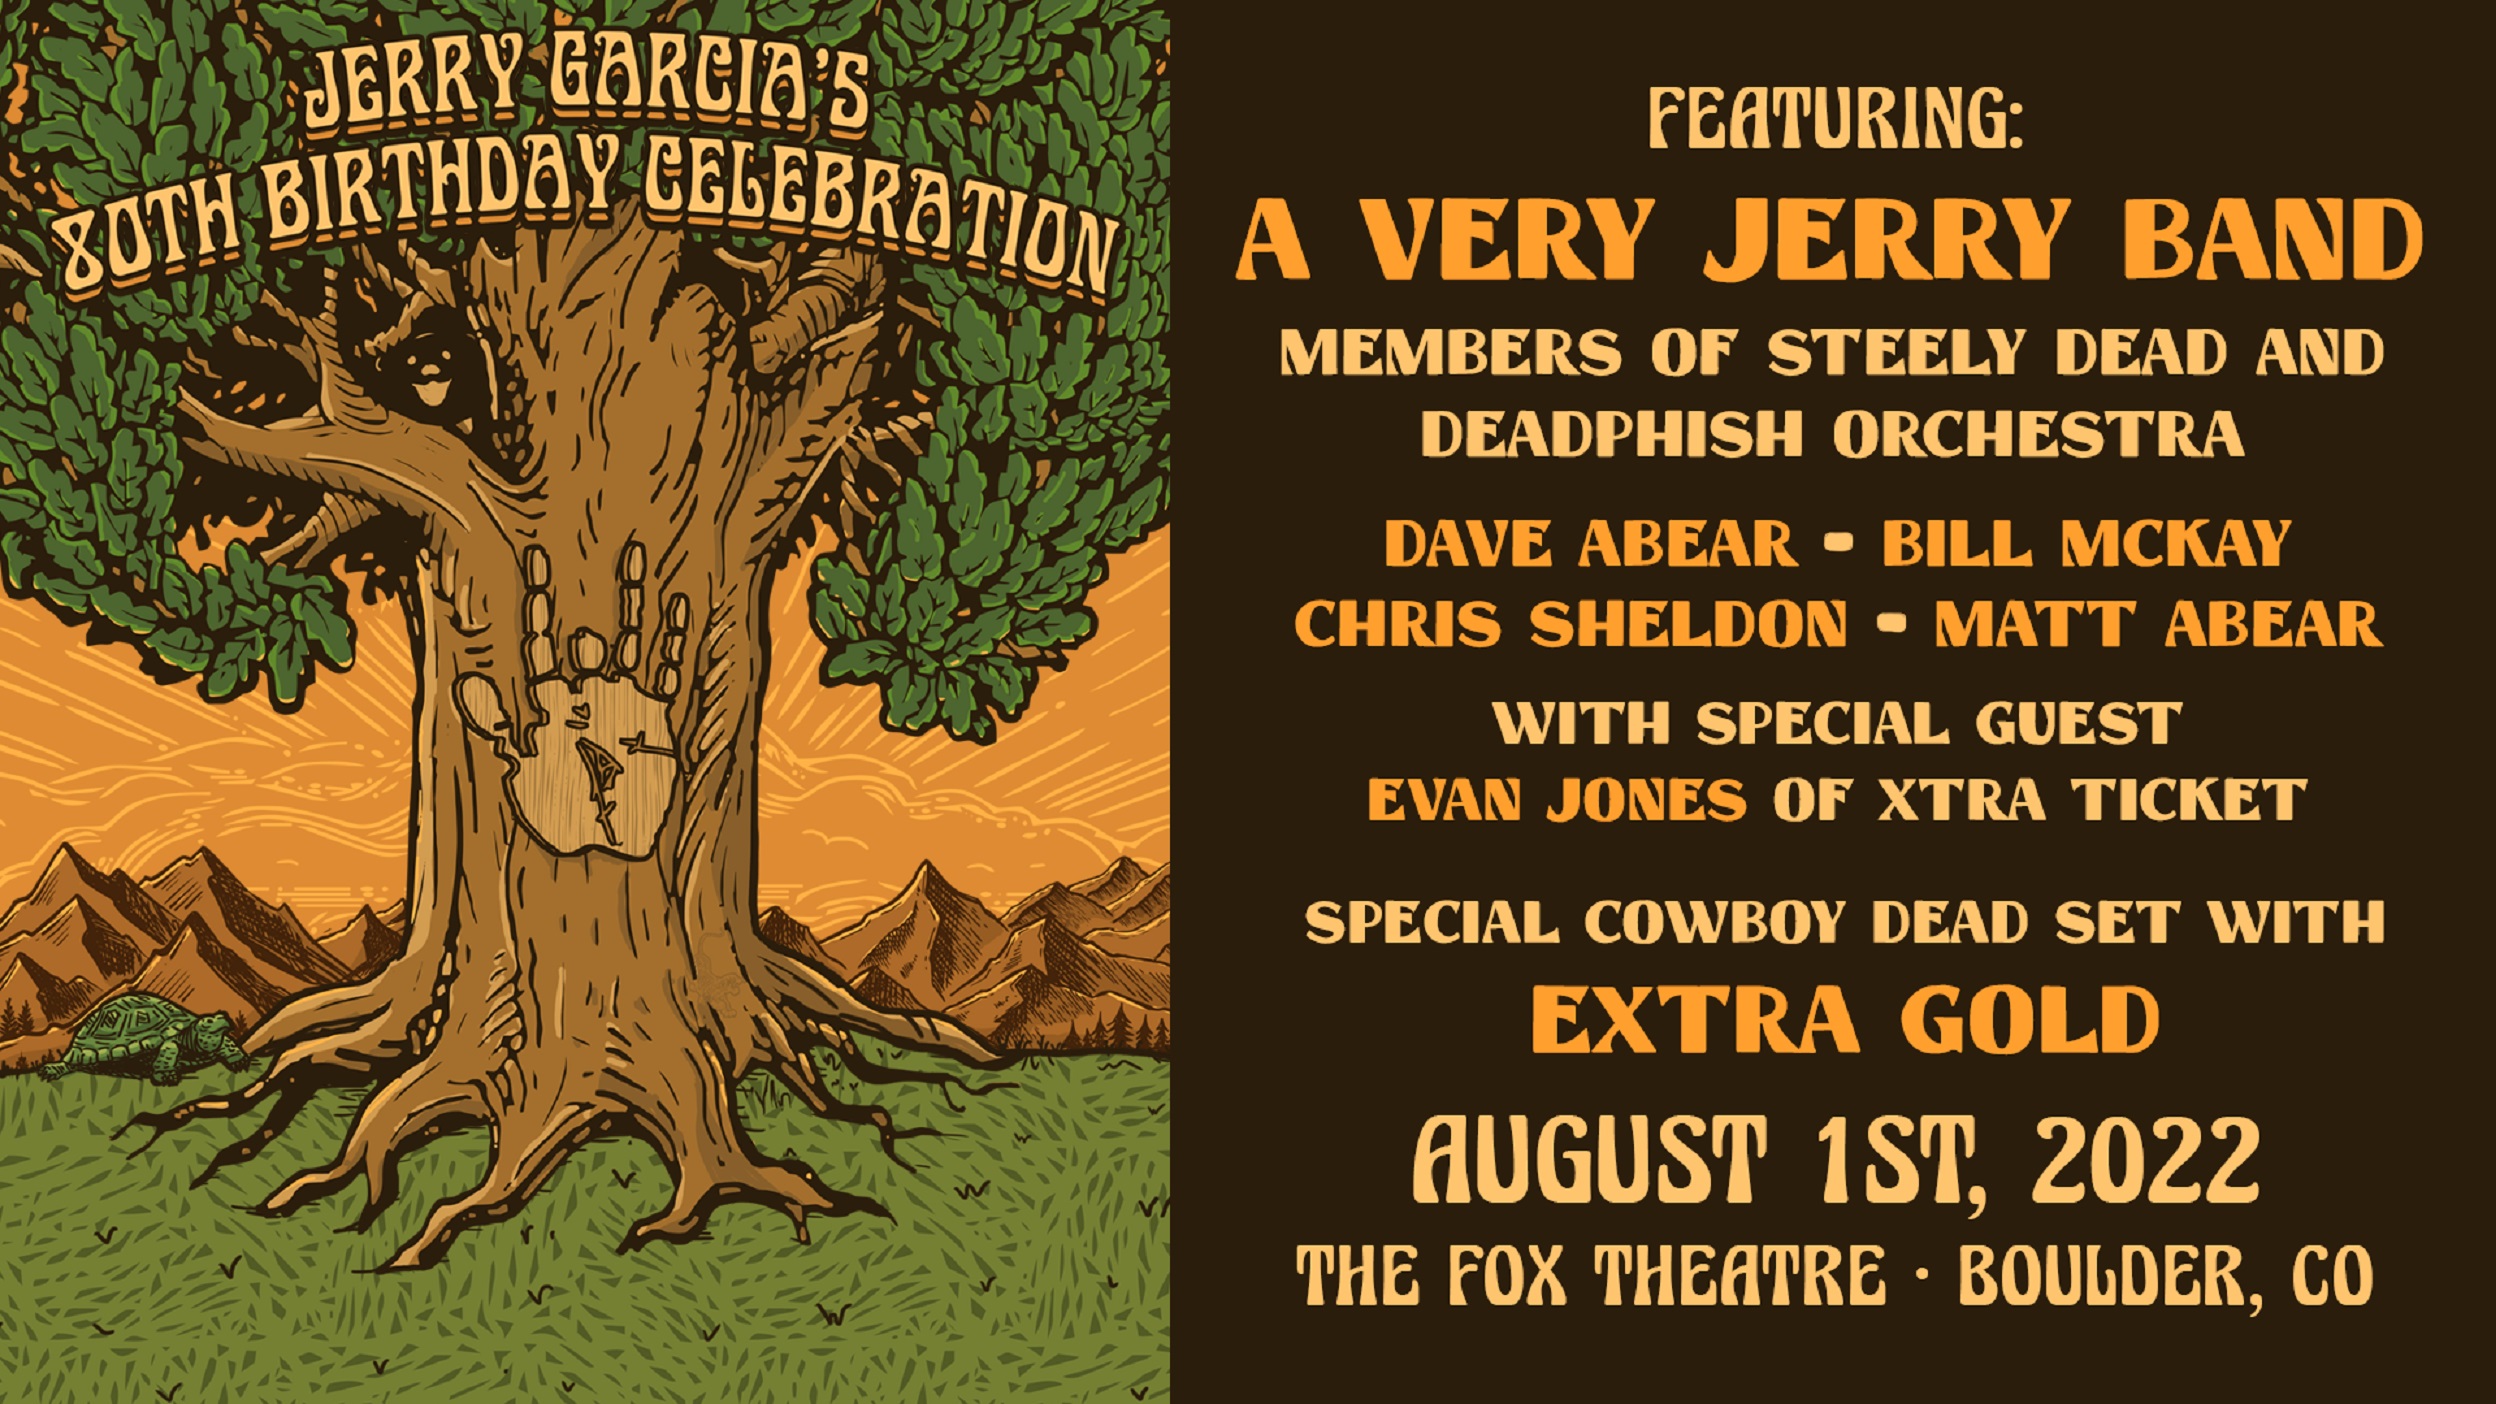 Jerry Garcia’s 80th birthday celebration with A Very Jerry Band!